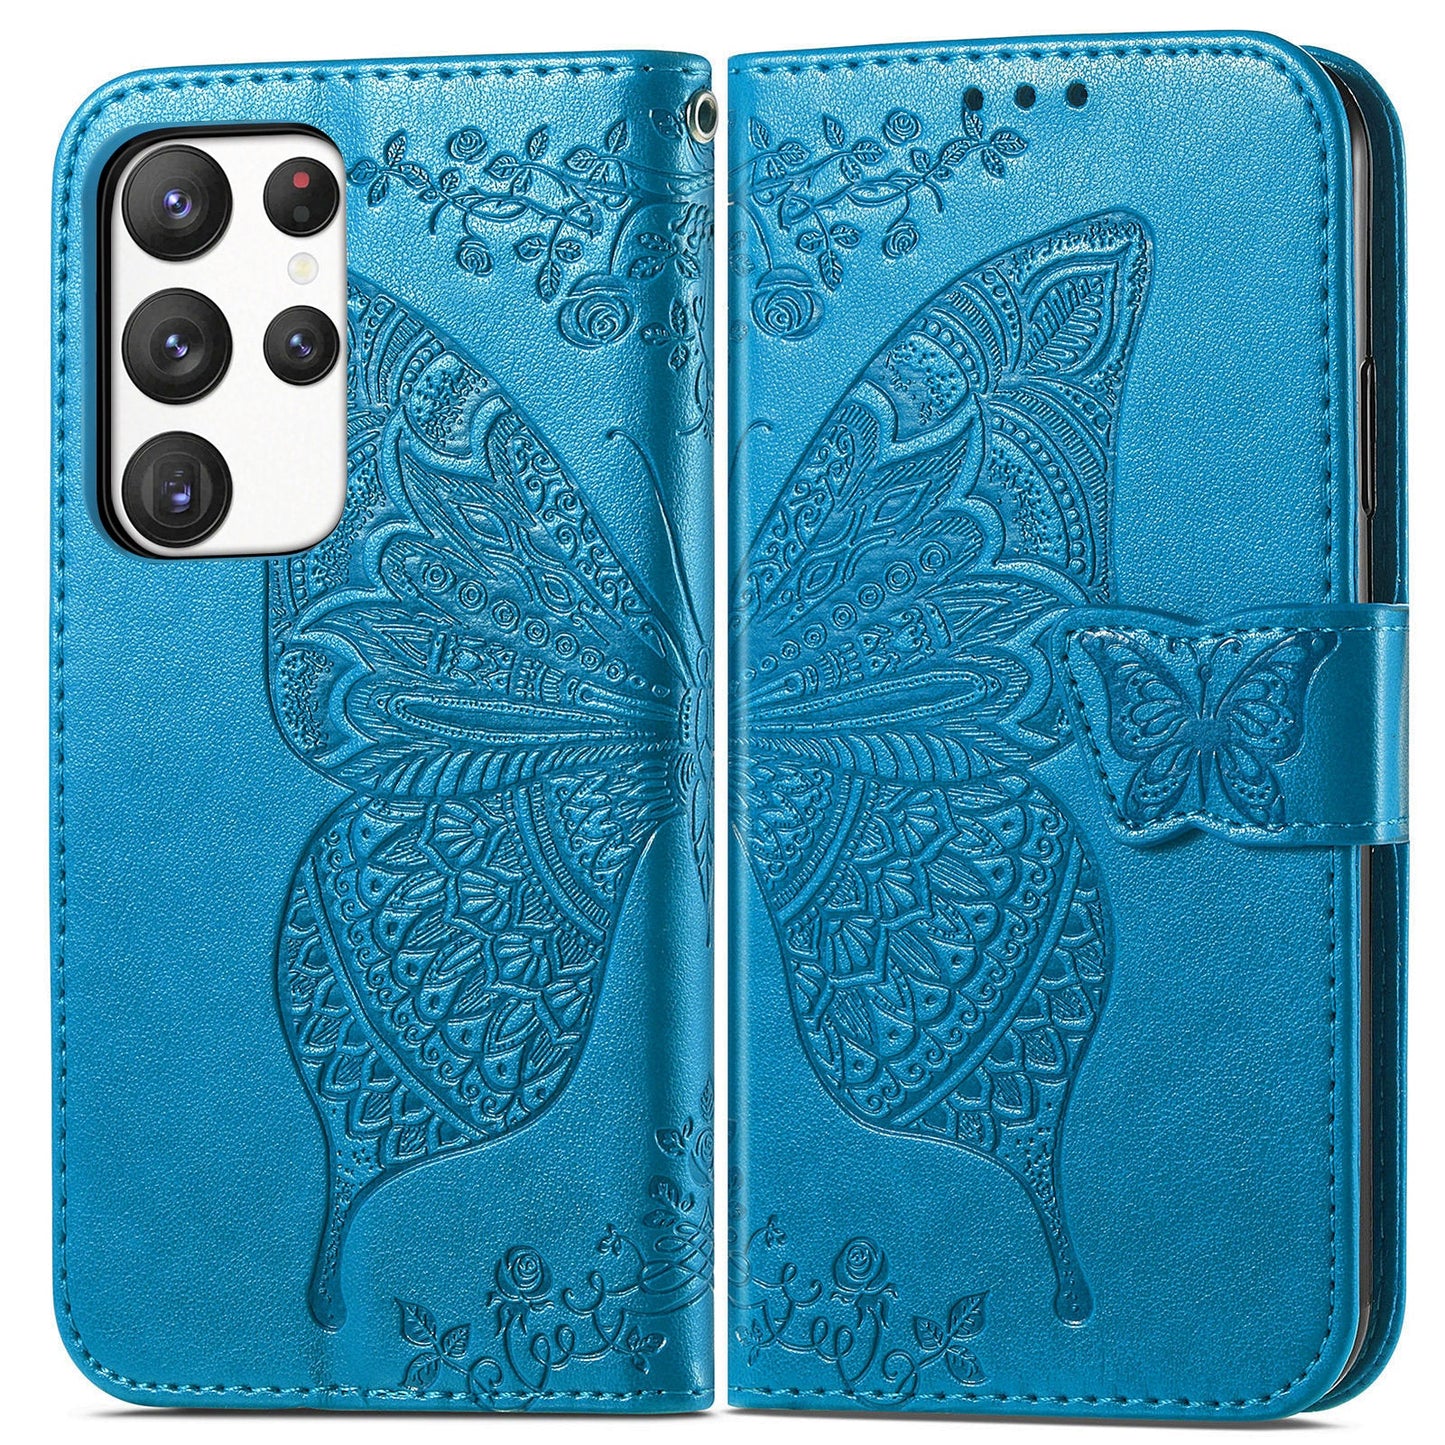 Embossed Butterfly Wallet Flip Case For Samsung Galaxy